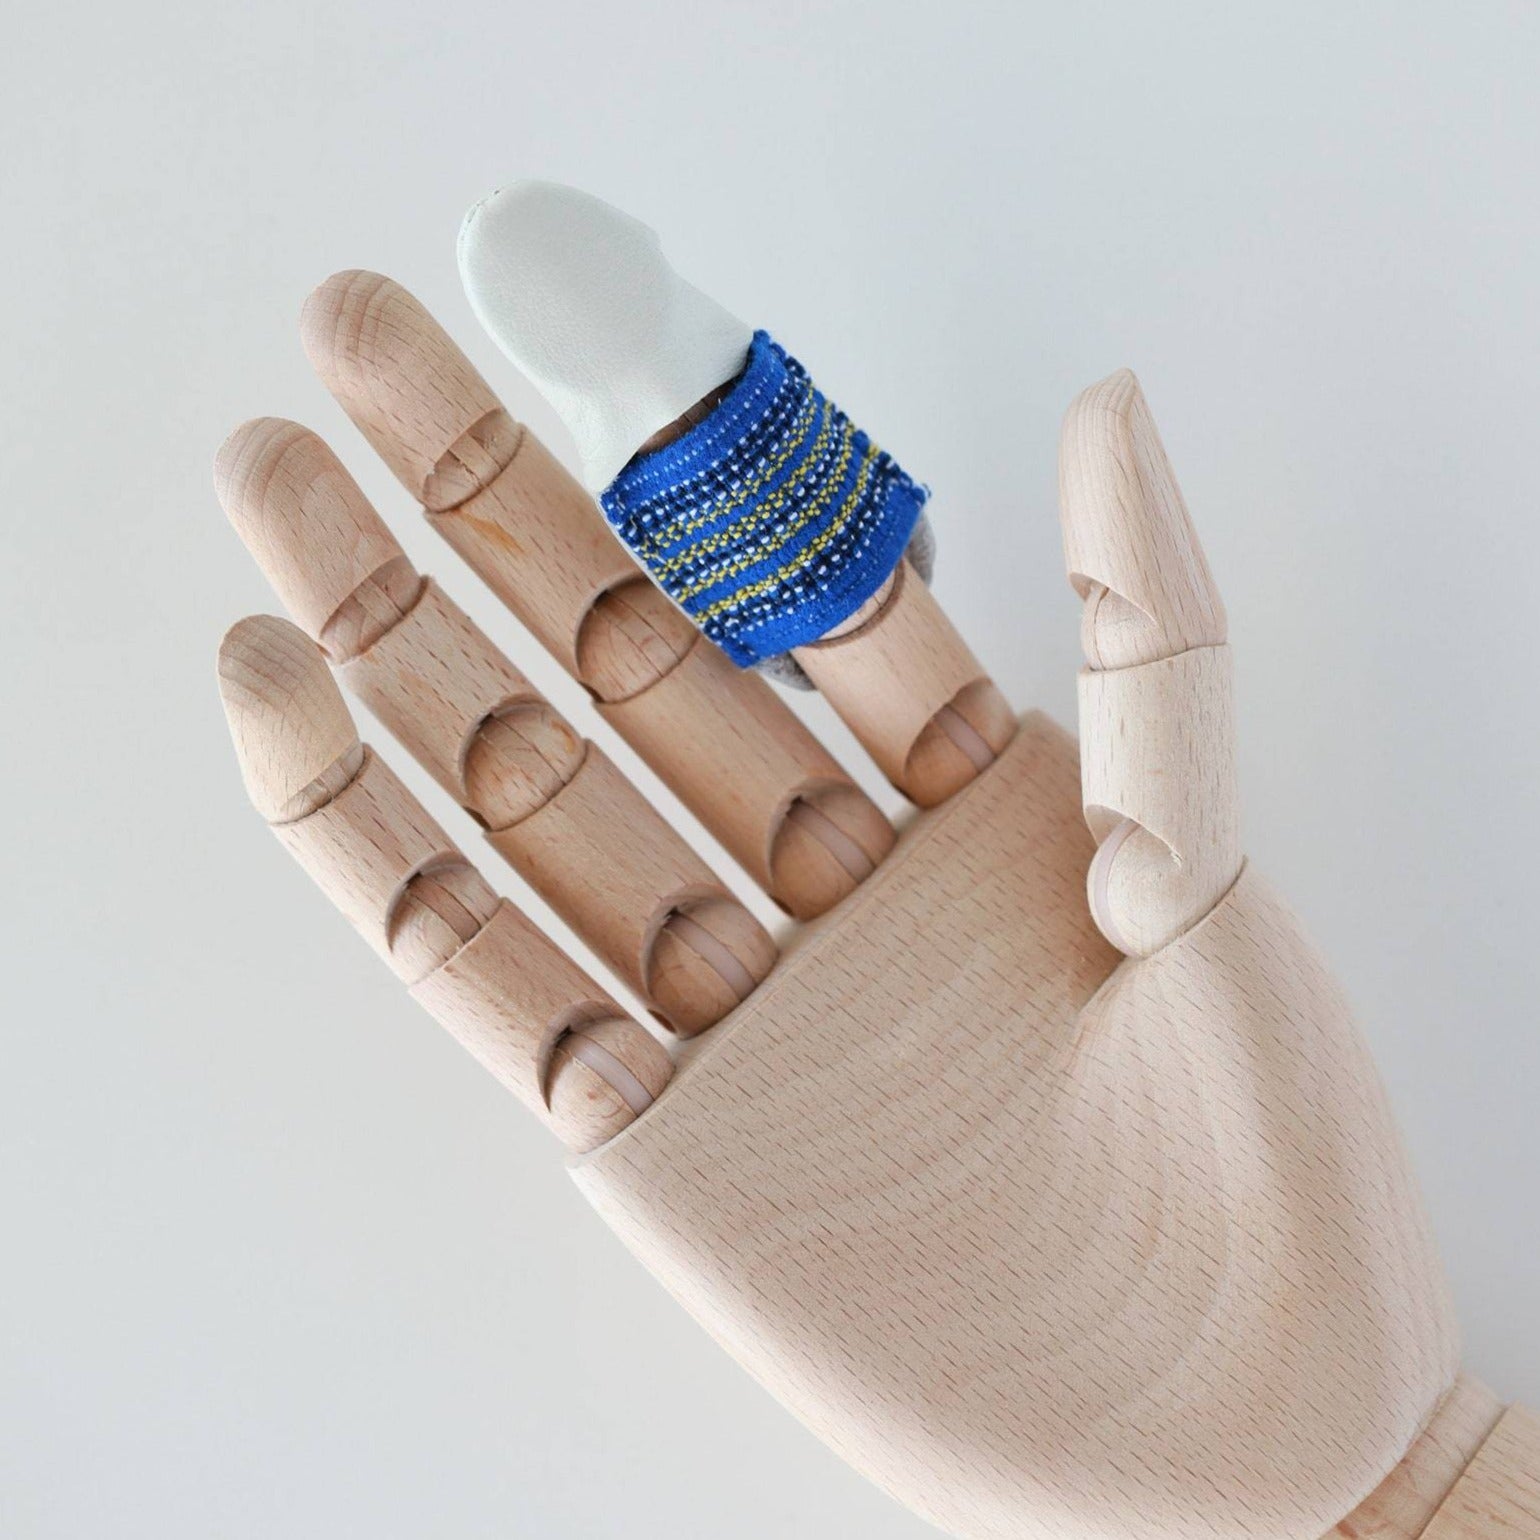 Sewing Thimbles For Fingers, For Most People's Fingers Sewing Thimble , For  Embroidery,DIY Handwork Hand Sewing,Needlework 